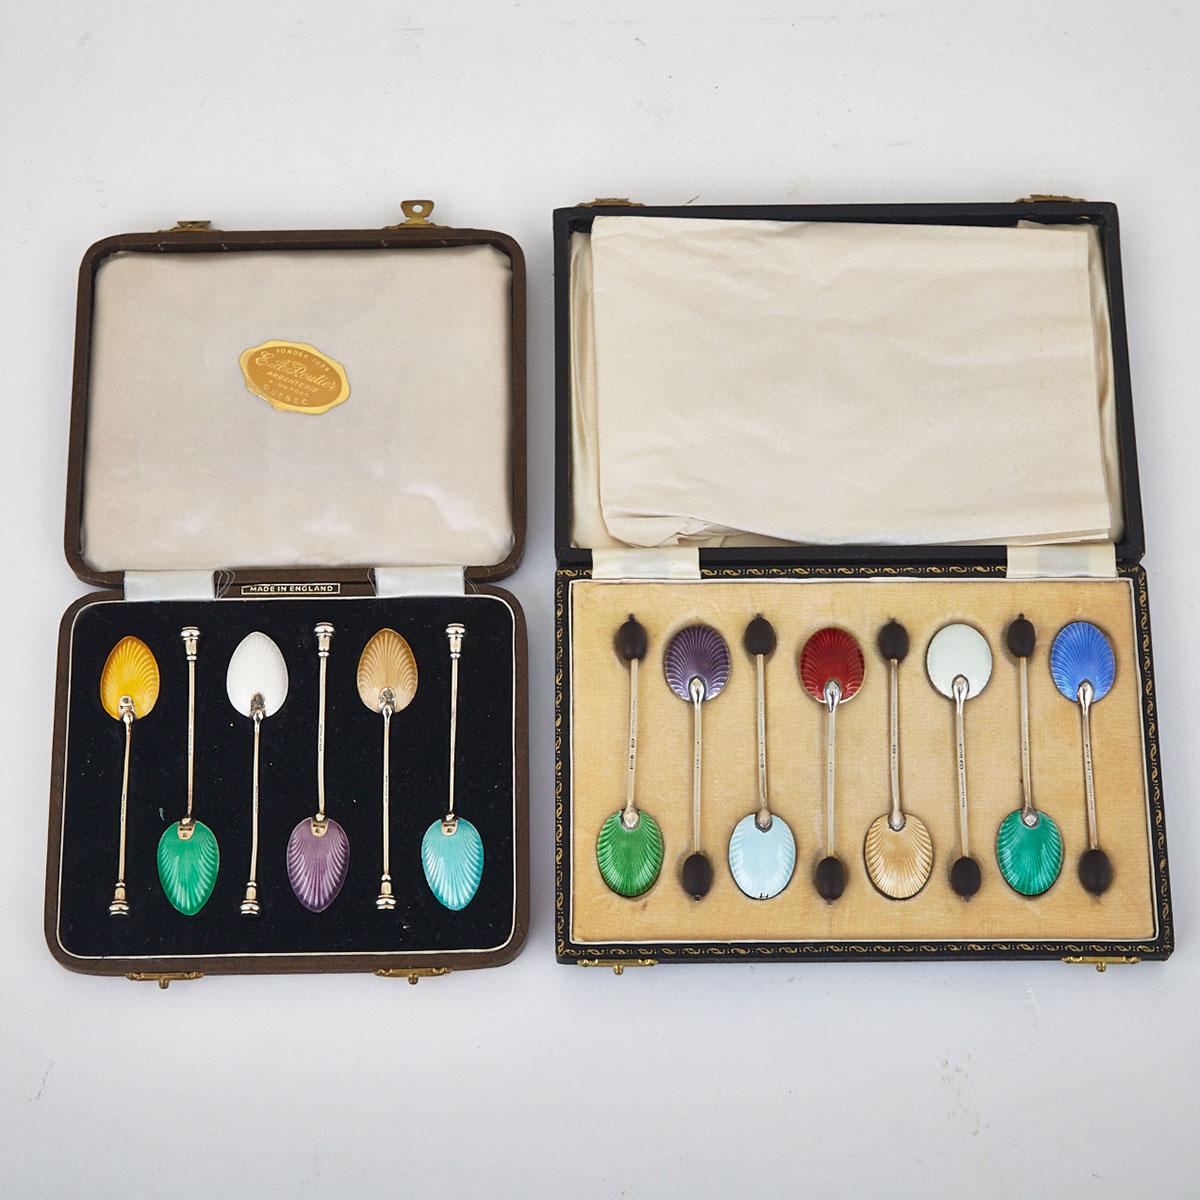 Fourteen English Silver and Translucent Enamel Bean or Seal Topped Coffee Spoons, William Suckling and Barker Bros., Birmingham, 1949/50